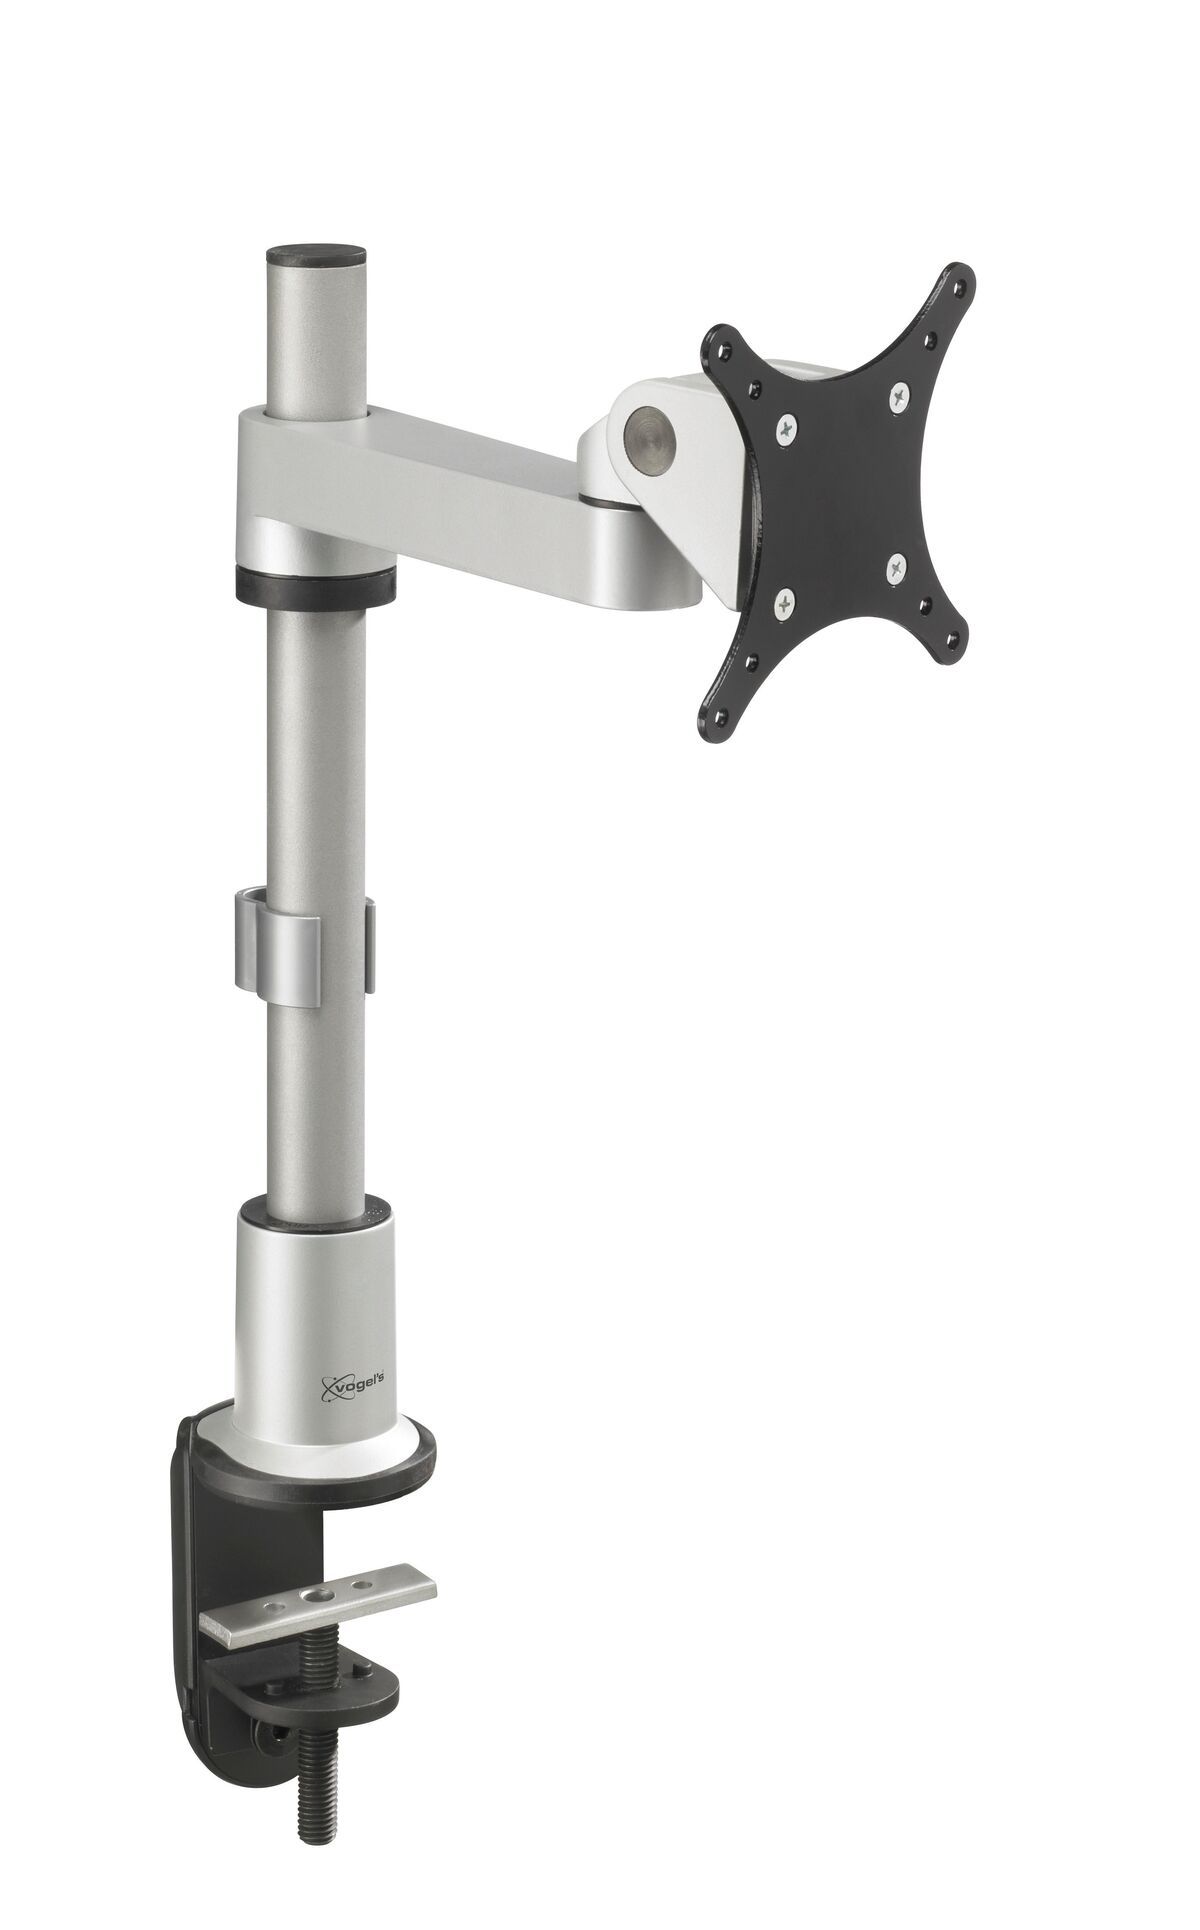 Vogel's PFD 8522 Monitor Arm static (silver) - For monitors up to 13 kg - Ideally suited for Gaming and (Home) Office - Product